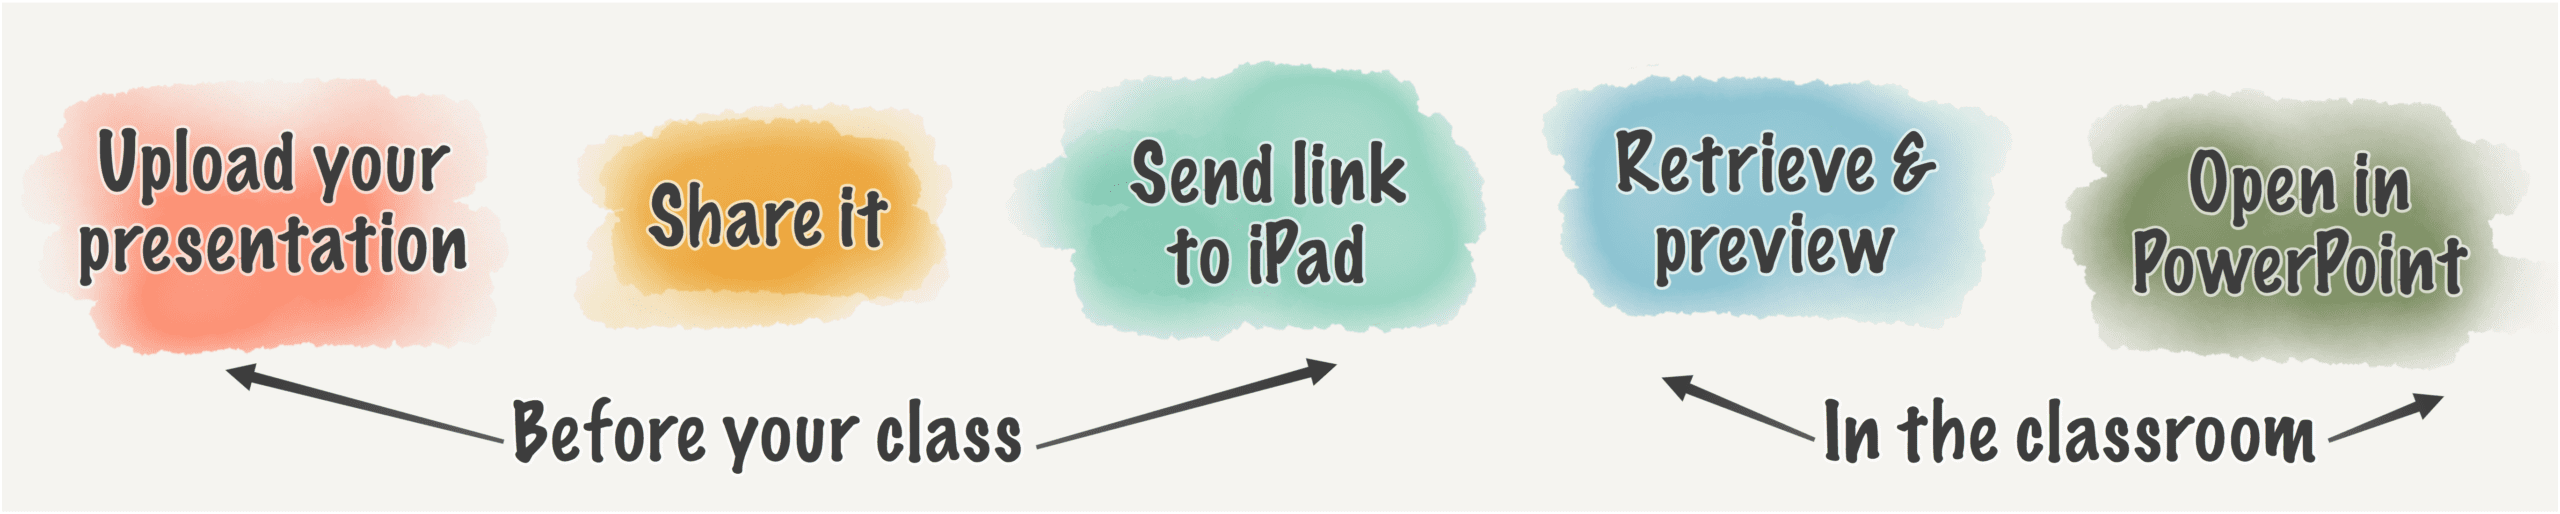 Illustration showing how to send your big presentation file to our iPads. Before your class: Upload your presentation, Share it, Send link to iPad. In the classroom: Retrieve & preview, Open in PowerPoint.